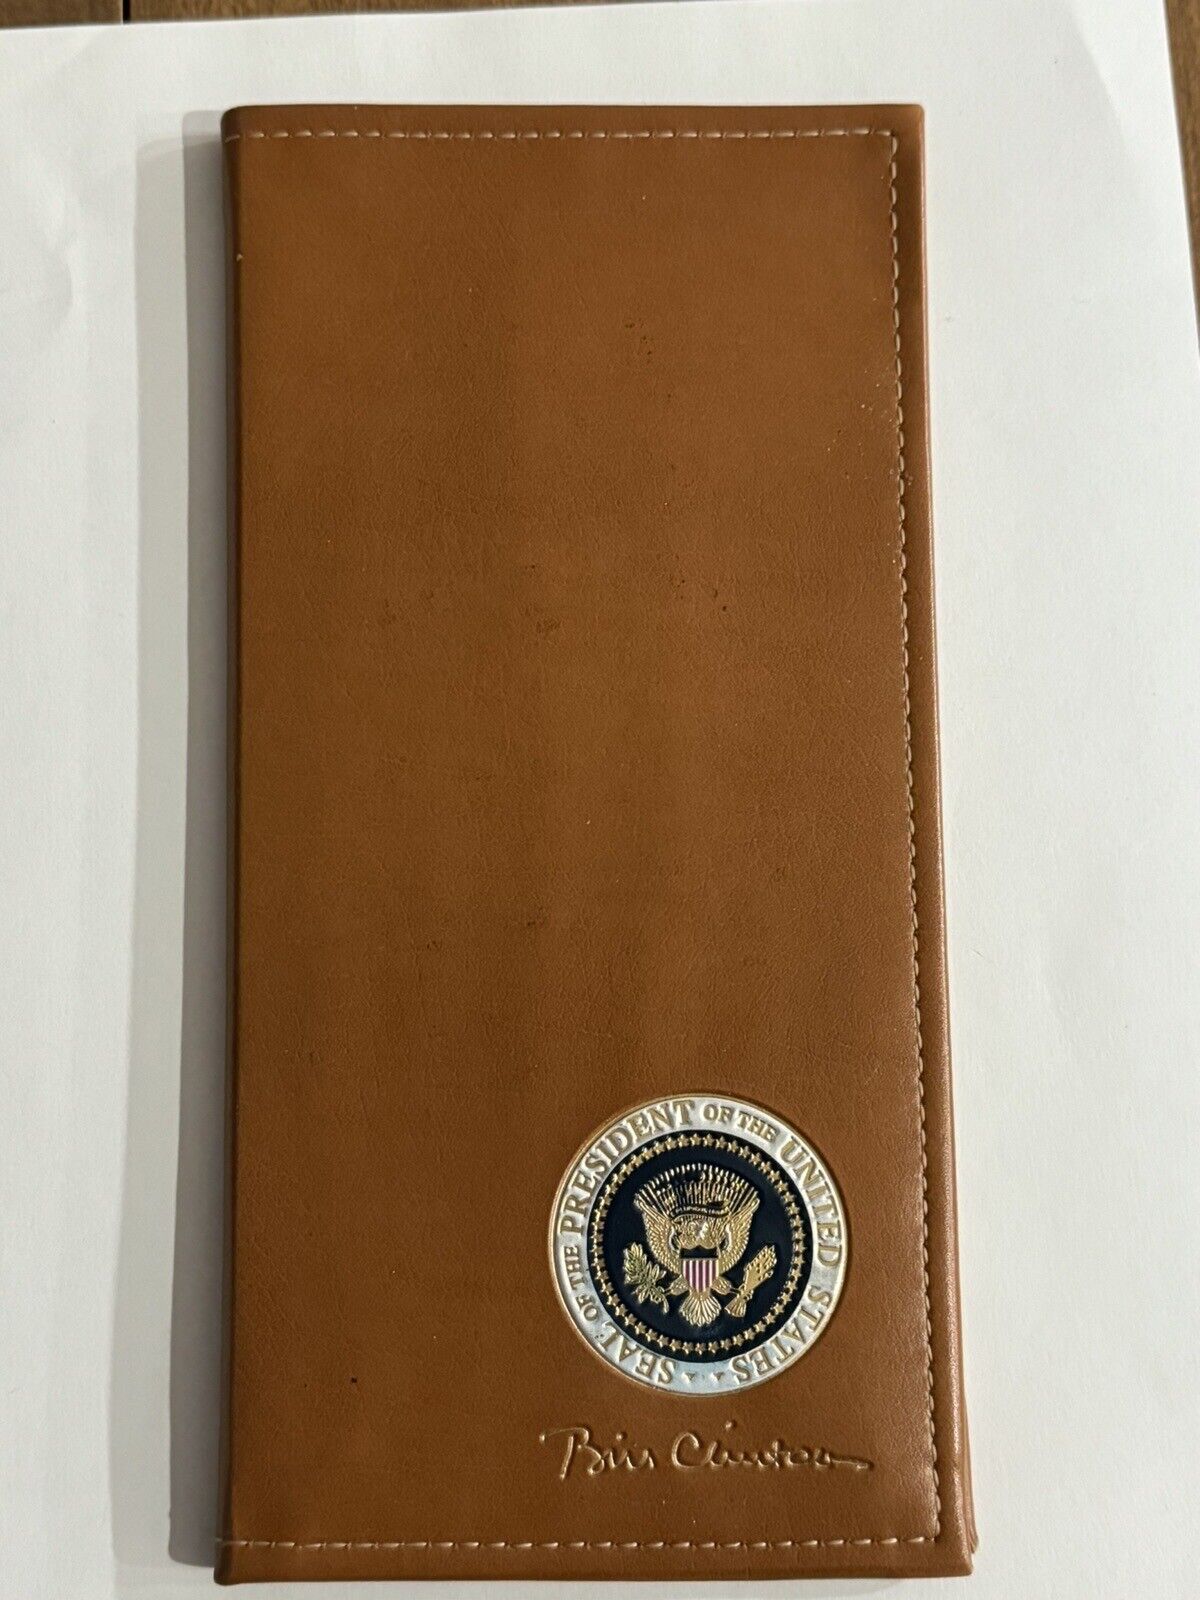 1997 Official Clinton White House Presentation Piece - Leather Bound Long Wallet